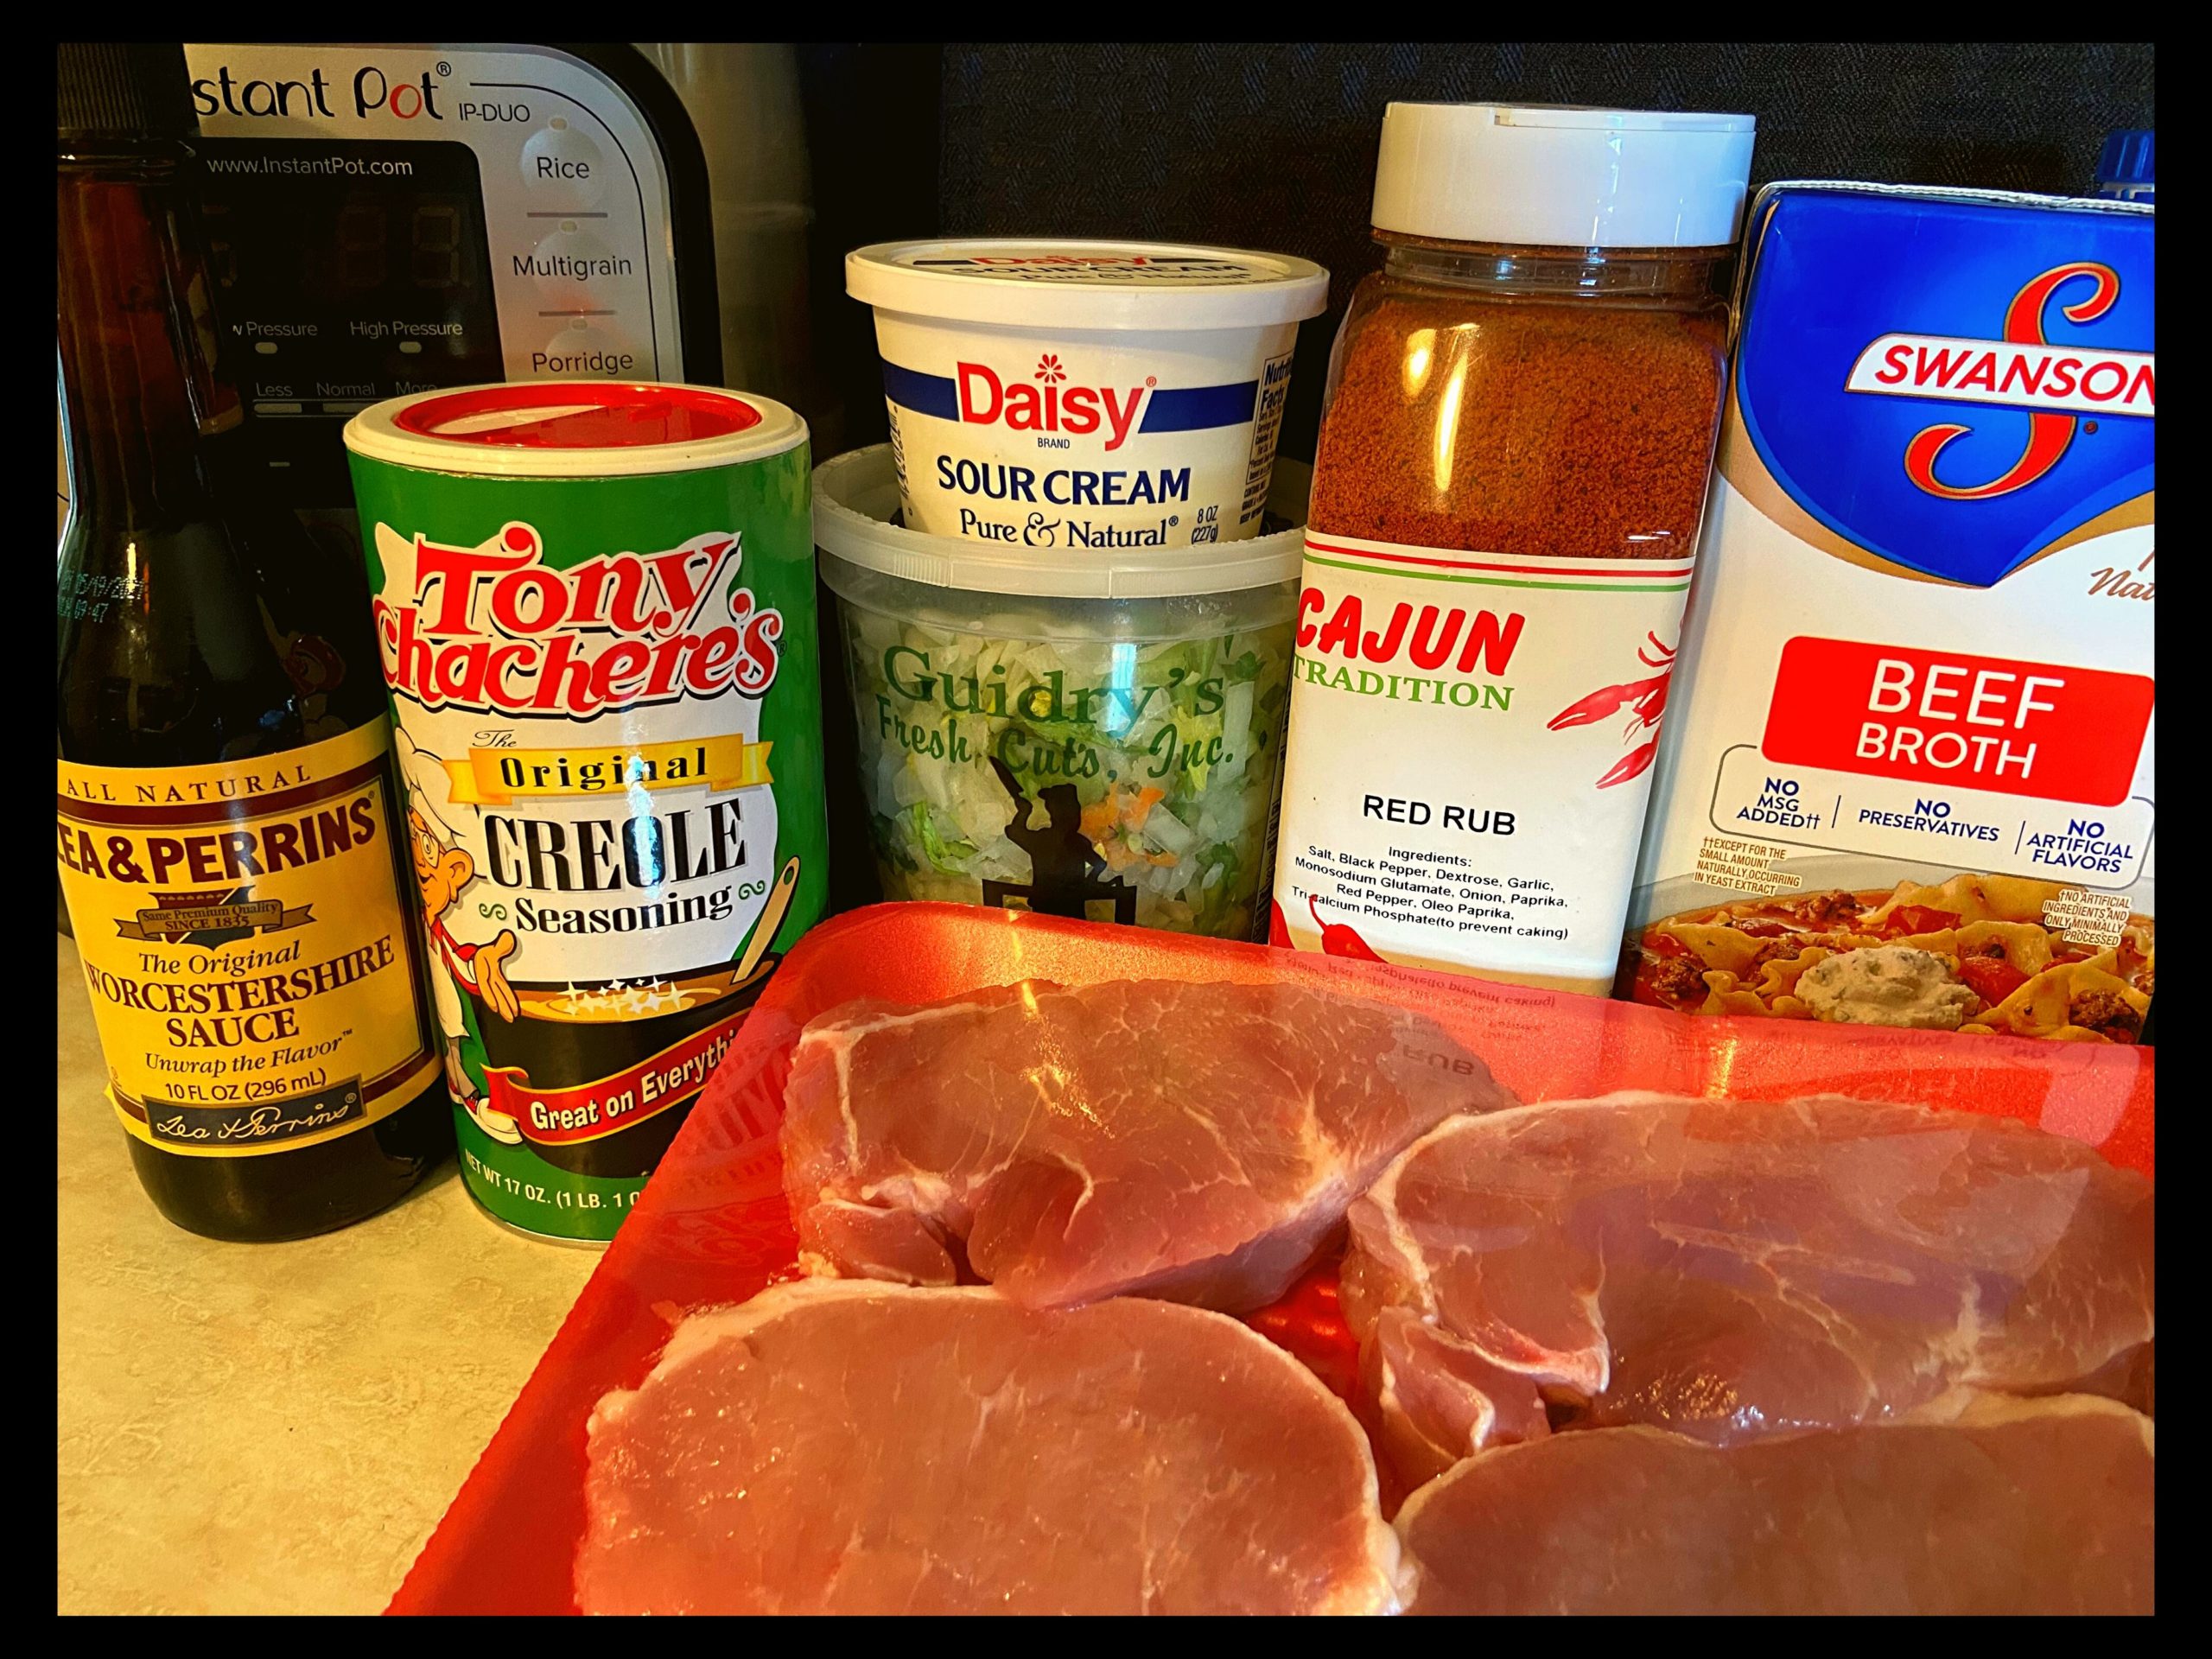 Raw pork chops, worcestershire sauce, tony chachere's seasoning, diced onion, bell pepper, celery, container of sour cream, cajun red rub seasoning, and beef broth on a kitchen counter in front of an Instant Pot.